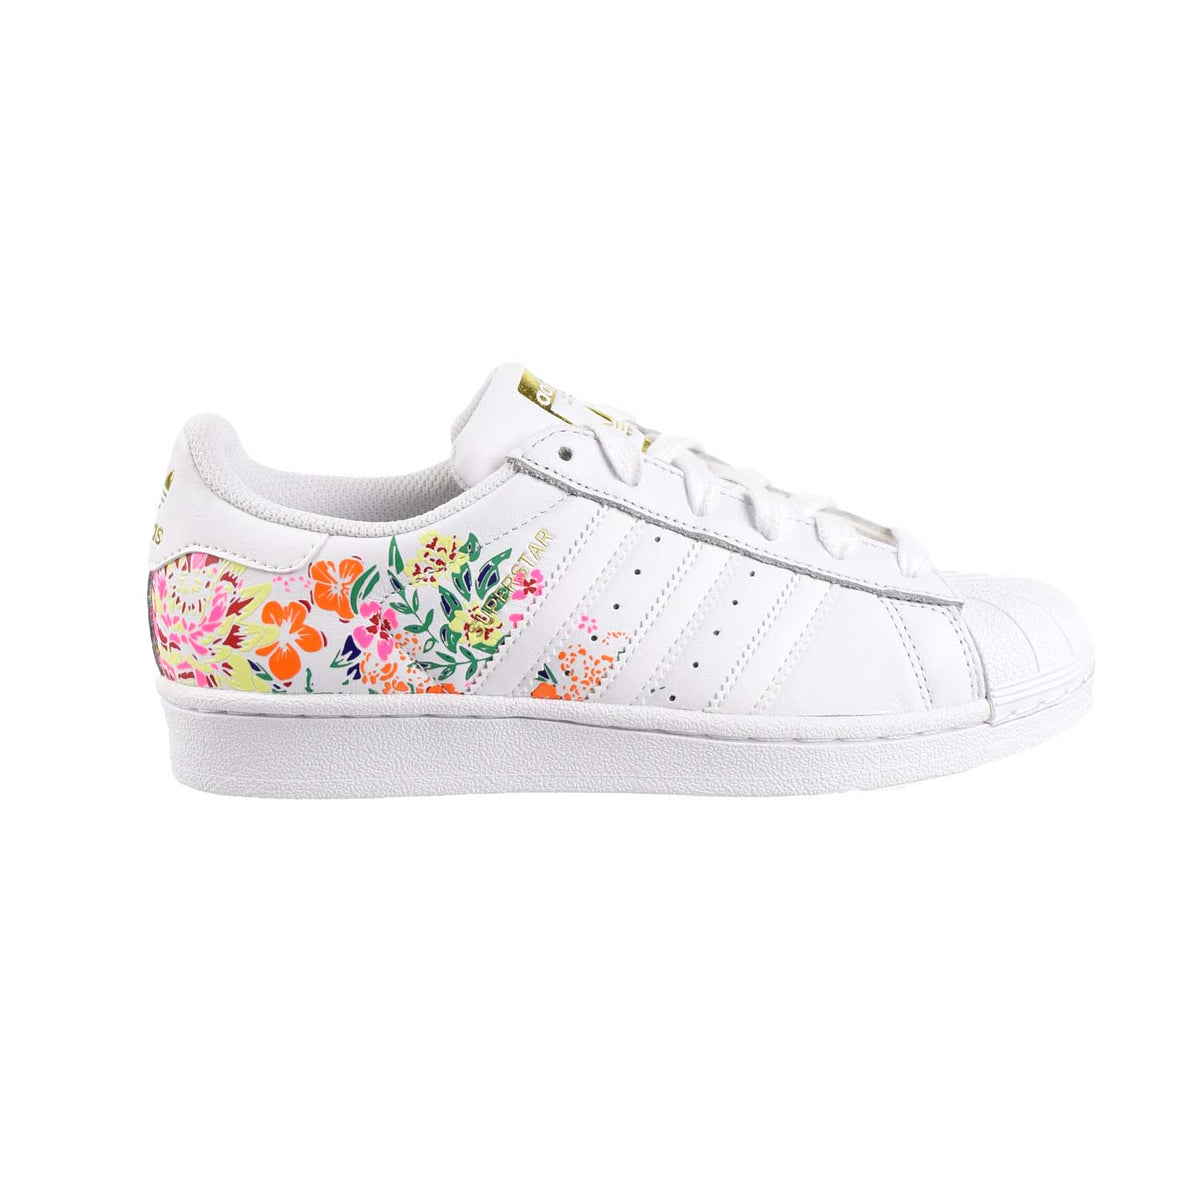 Women's Floral Adidas Shoes